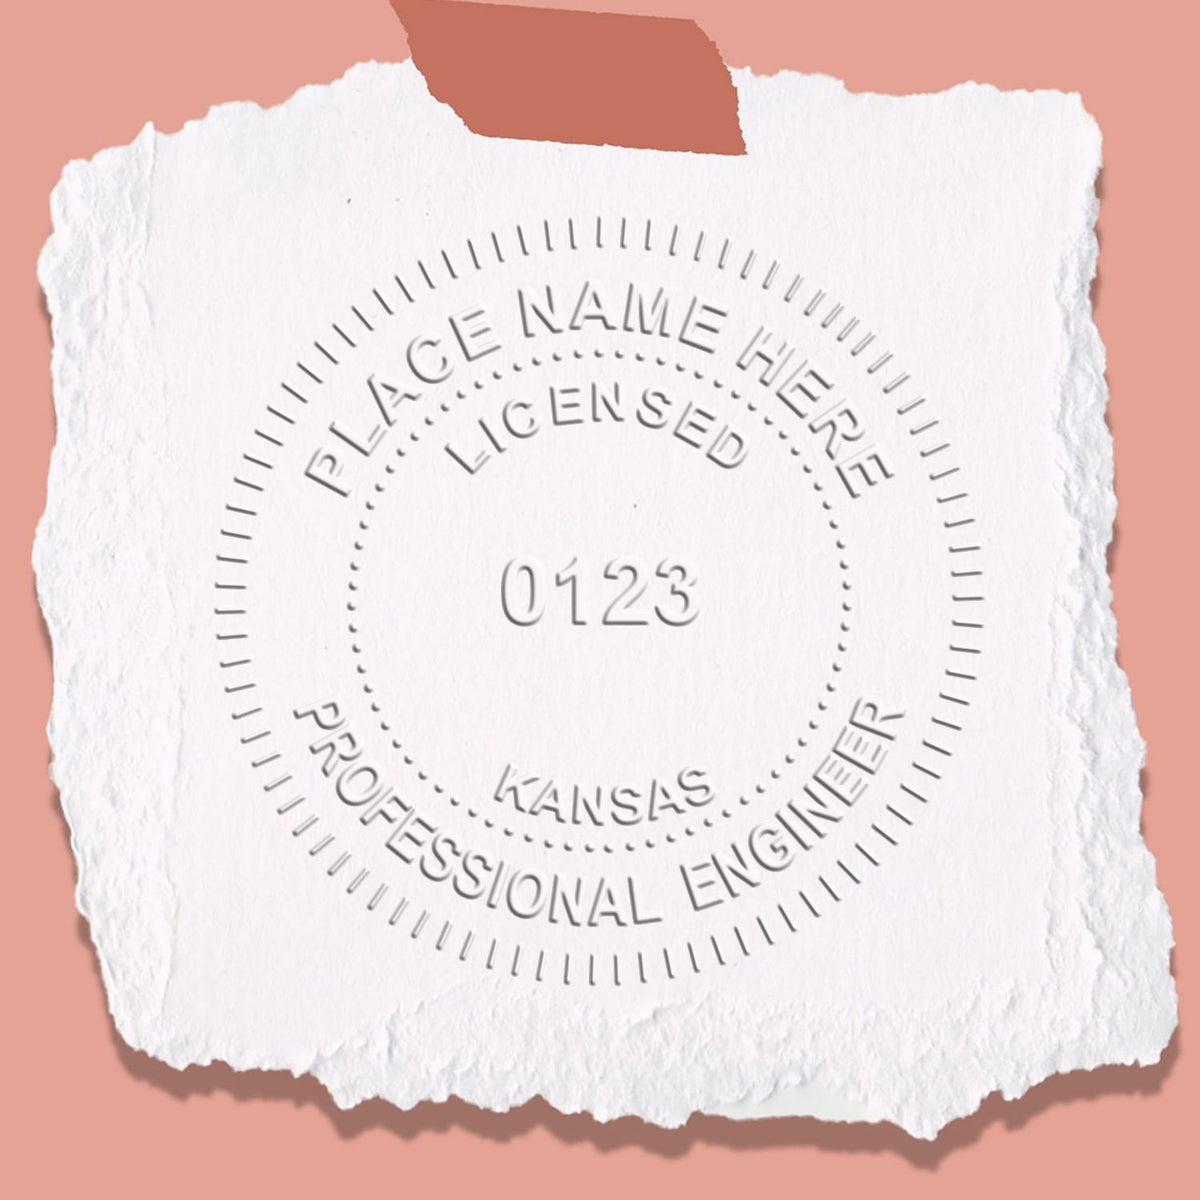 A lifestyle photo showing a stamped image of the Handheld Kansas Professional Engineer Embosser on a piece of paper